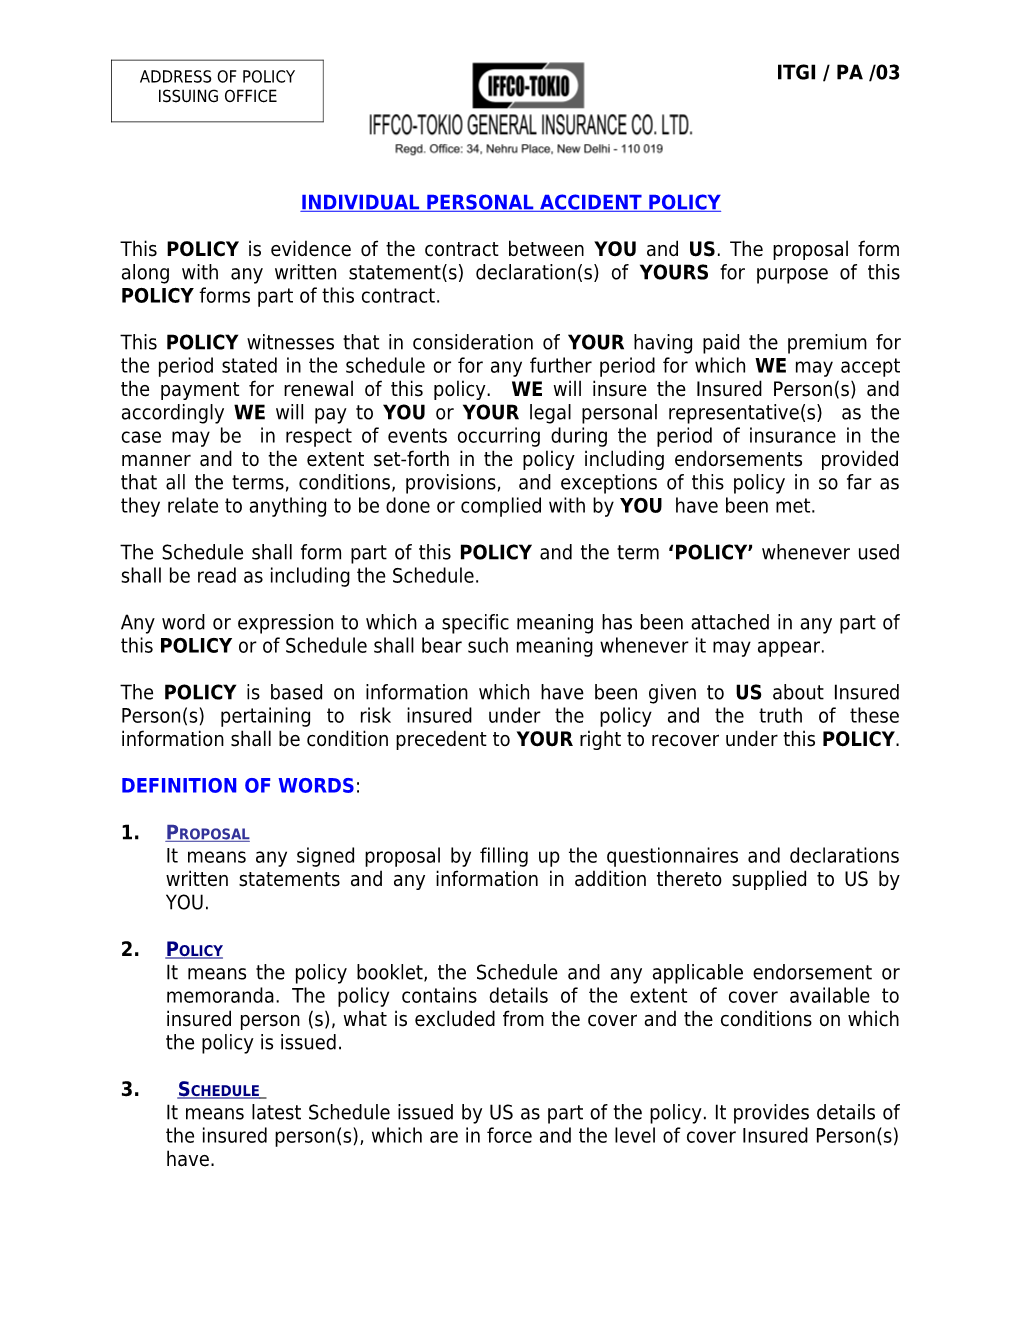 Individual Personal Accident Policy